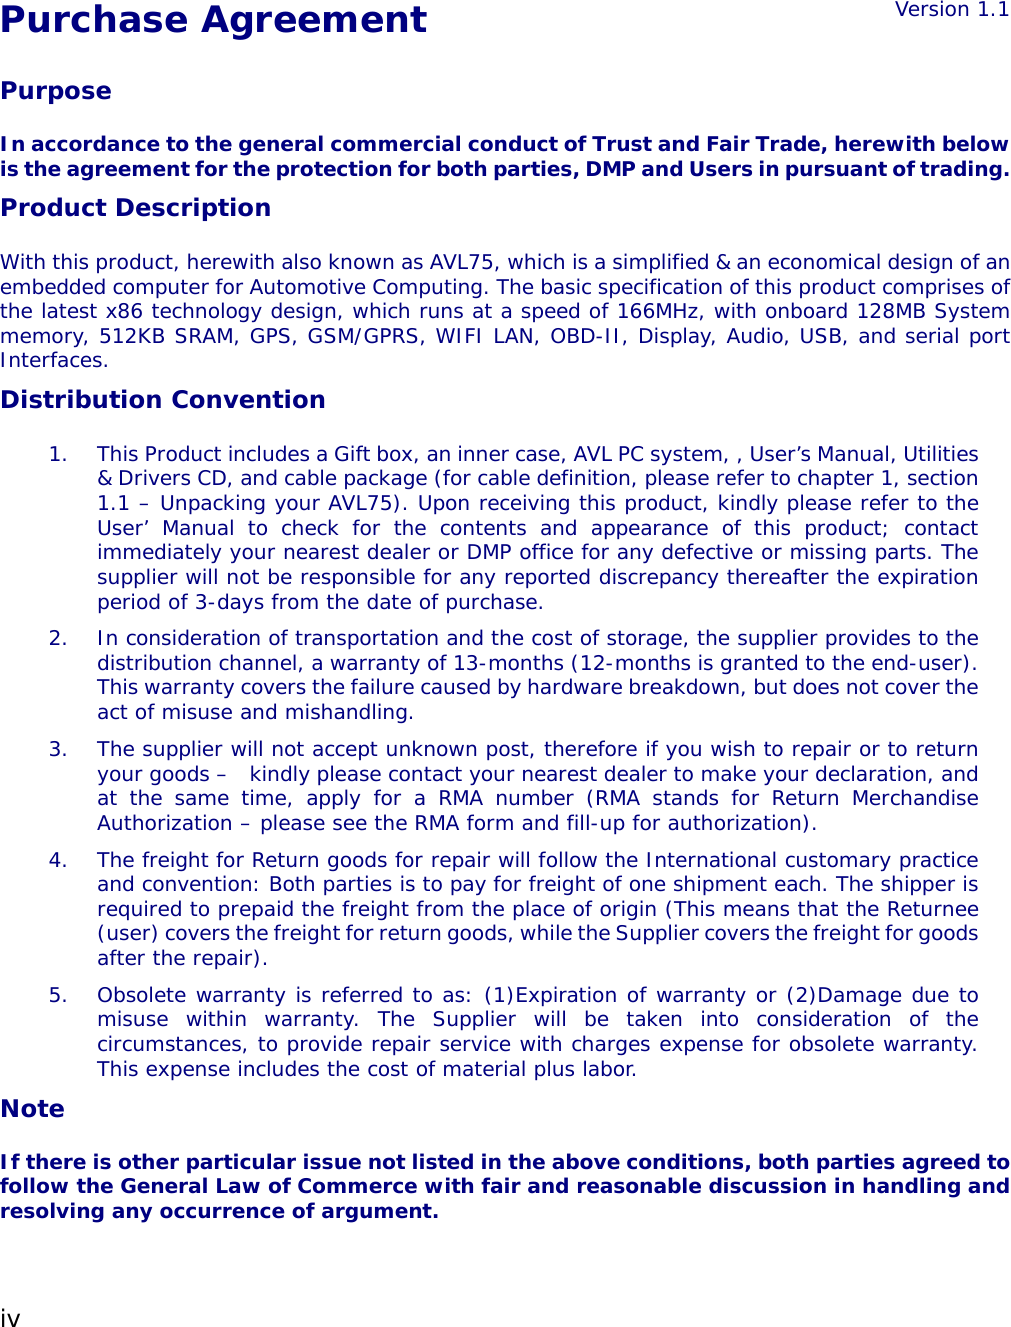 iv  Purchase Agreement Version 1.1Purpose In accordance to the general commercial conduct of Trust and Fair Trade, herewith below is the agreement for the protection for both parties, DMP and Users in pursuant of trading. Product Description With this product, herewith also known as AVL75, which is a simplified &amp; an economical design of an embedded computer for Automotive Computing. The basic specification of this product comprises of the latest x86 technology design, which runs at a speed of 166MHz, with onboard 128MB System memory, 512KB SRAM, GPS, GSM/GPRS, WIFI LAN, OBD-II, Display, Audio, USB, and serial port Interfaces. Distribution Convention 1.  This Product includes a Gift box, an inner case, AVL PC system, , User’s Manual, Utilities &amp; Drivers CD, and cable package (for cable definition, please refer to chapter 1, section 1.1 – Unpacking your AVL75). Upon receiving this product, kindly please refer to the User’ Manual to check for the contents and appearance of this product; contact immediately your nearest dealer or DMP office for any defective or missing parts. The supplier will not be responsible for any reported discrepancy thereafter the expiration period of 3-days from the date of purchase.  2.  In consideration of transportation and the cost of storage, the supplier provides to the distribution channel, a warranty of 13-months (12-months is granted to the end-user). This warranty covers the failure caused by hardware breakdown, but does not cover the act of misuse and mishandling.  3.  The supplier will not accept unknown post, therefore if you wish to repair or to return your goods –  kindly please contact your nearest dealer to make your declaration, and at the same time, apply for a RMA number (RMA stands for Return Merchandise Authorization – please see the RMA form and fill-up for authorization). 4.  The freight for Return goods for repair will follow the International customary practice and convention: Both parties is to pay for freight of one shipment each. The shipper is required to prepaid the freight from the place of origin (This means that the Returnee (user) covers the freight for return goods, while the Supplier covers the freight for goods after the repair). 5.  Obsolete warranty is referred to as: (1)Expiration of warranty or (2)Damage due to misuse within warranty. The Supplier will be taken into consideration of the circumstances, to provide repair service with charges expense for obsolete warranty. This expense includes the cost of material plus labor. Note If there is other particular issue not listed in the above conditions, both parties agreed to follow the General Law of Commerce with fair and reasonable discussion in handling and resolving any occurrence of argument. 